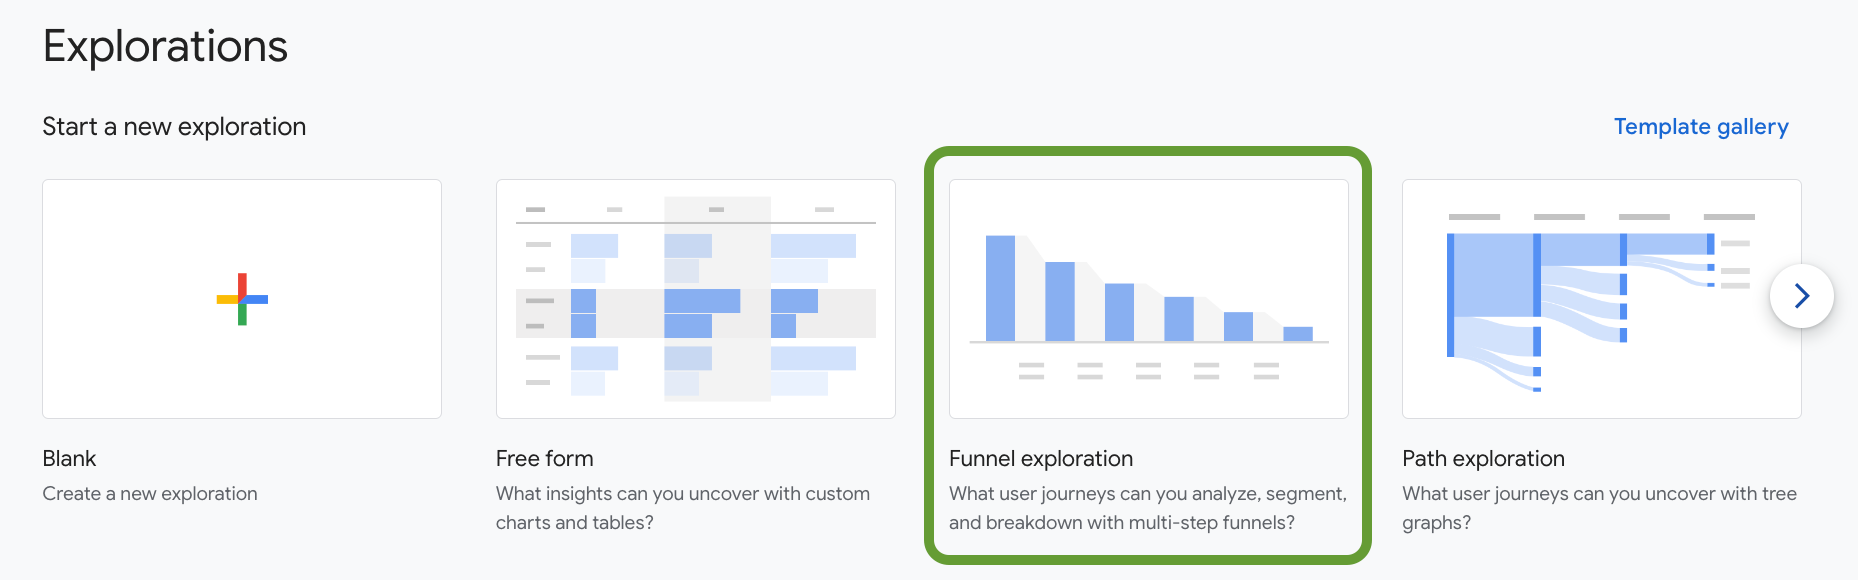 How to Create a Funnel Exploration for SaaS and B2B in Google Analytics 4?